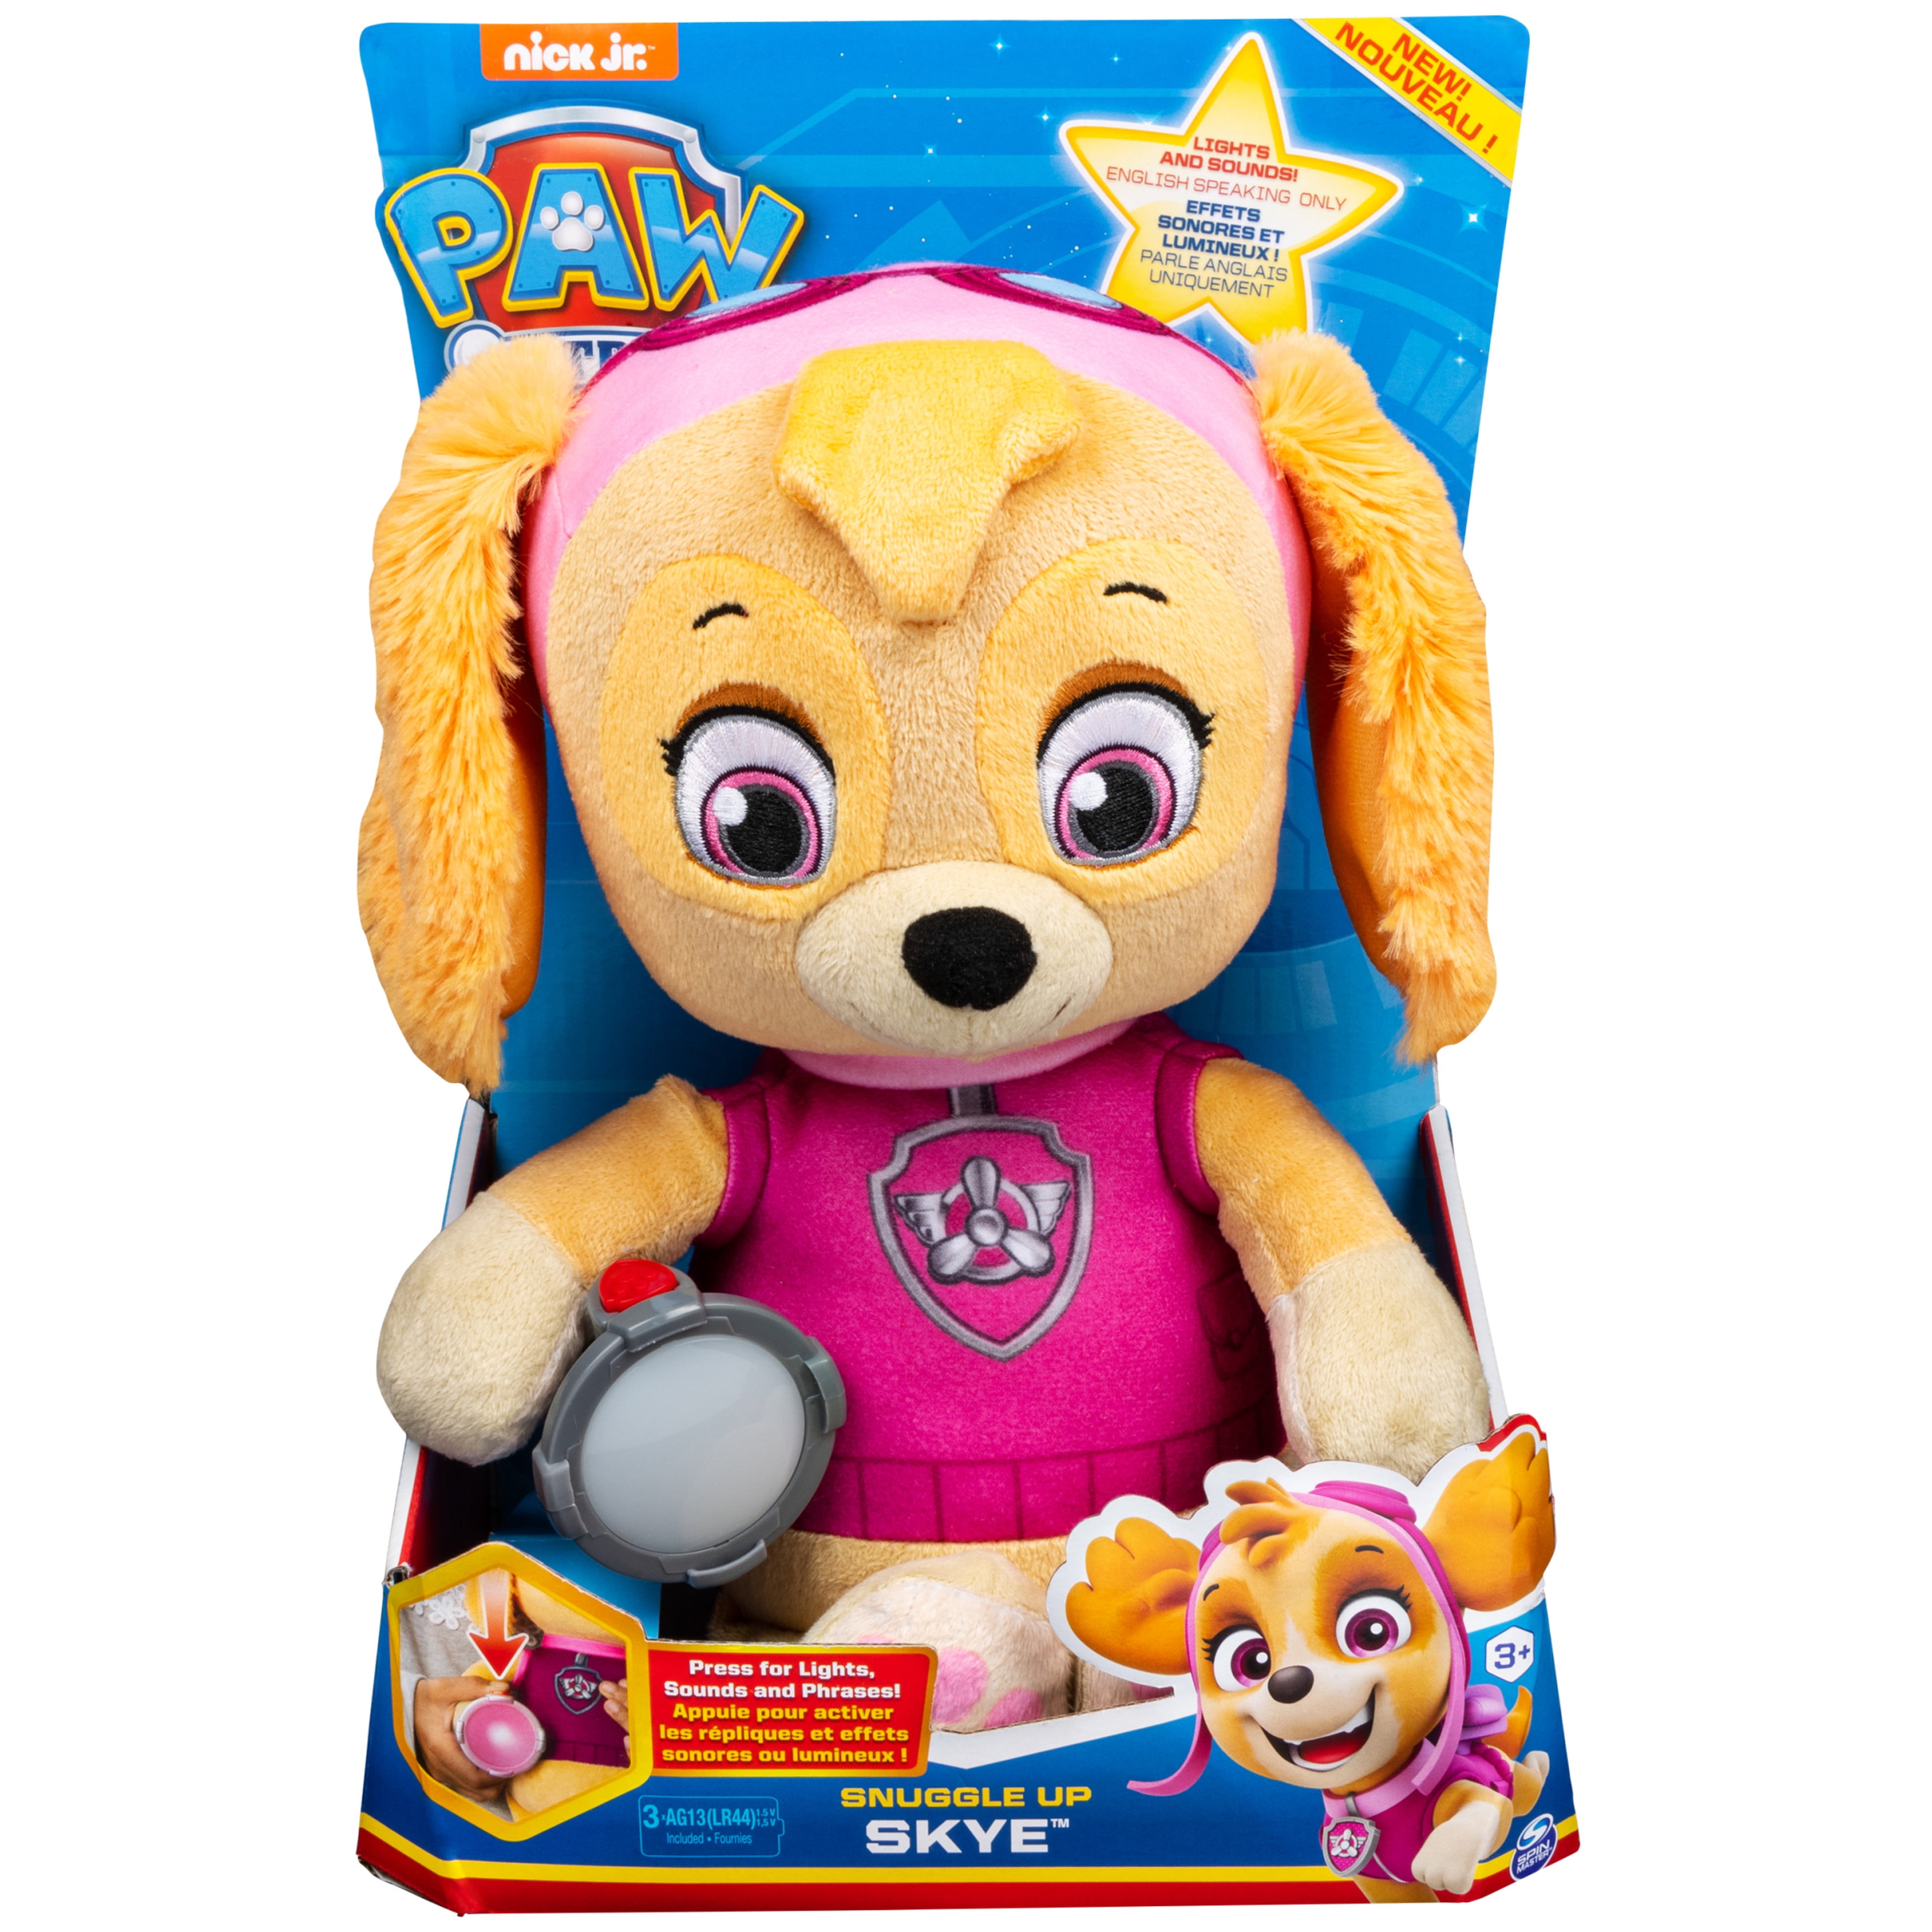 PAW Patrol, Snuggle Up Skye Plush with Flashlight and Sounds, for Kids Aged  3 and Up